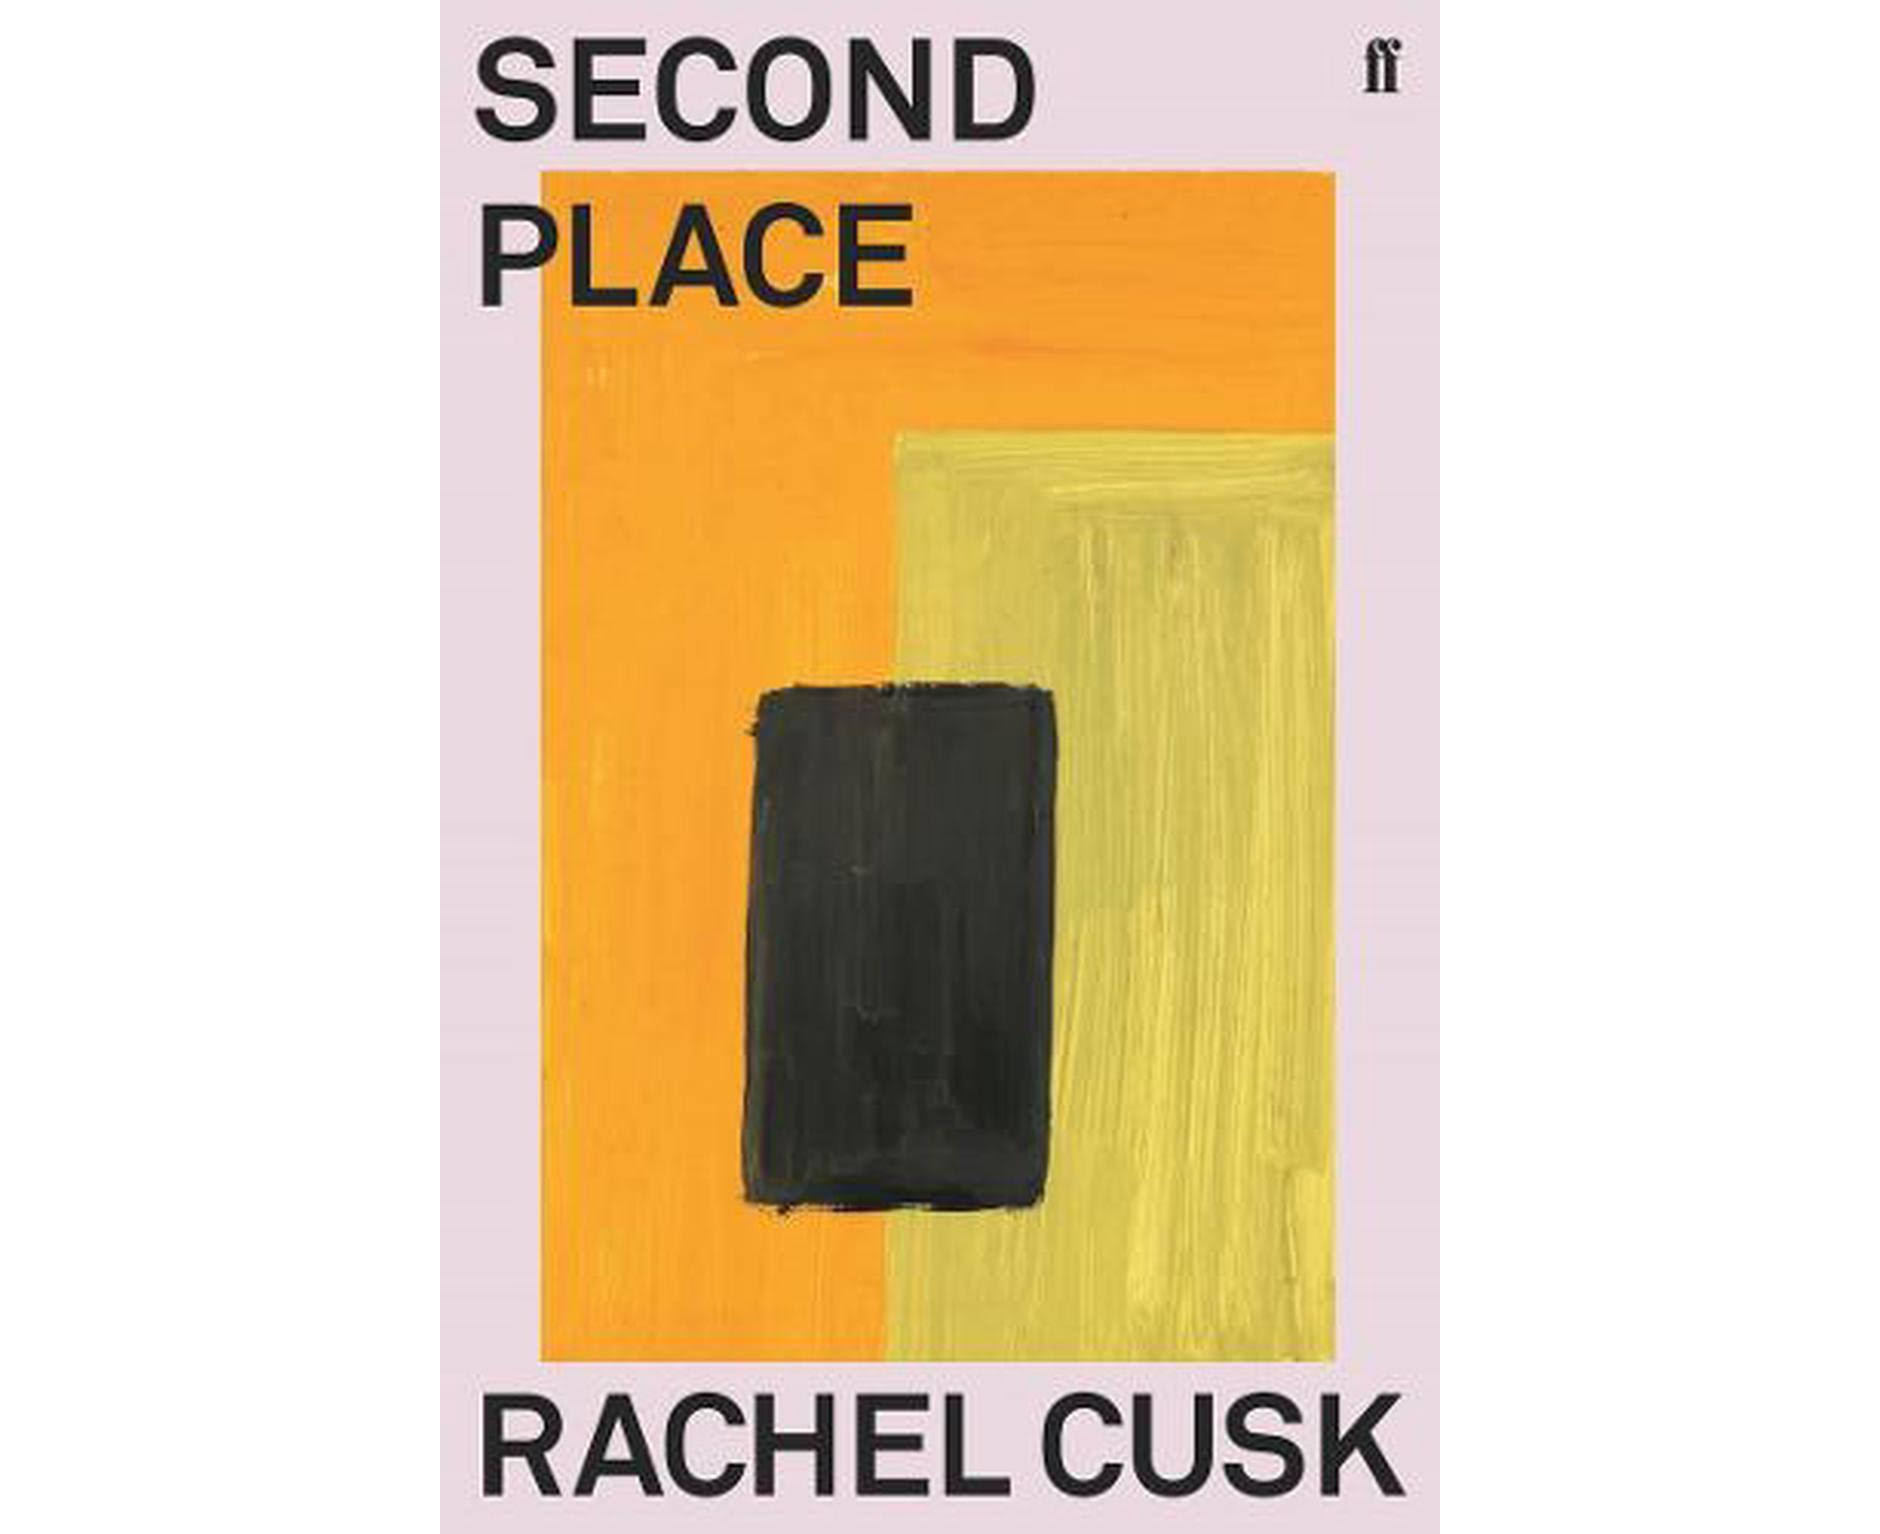 Second Place [Book]